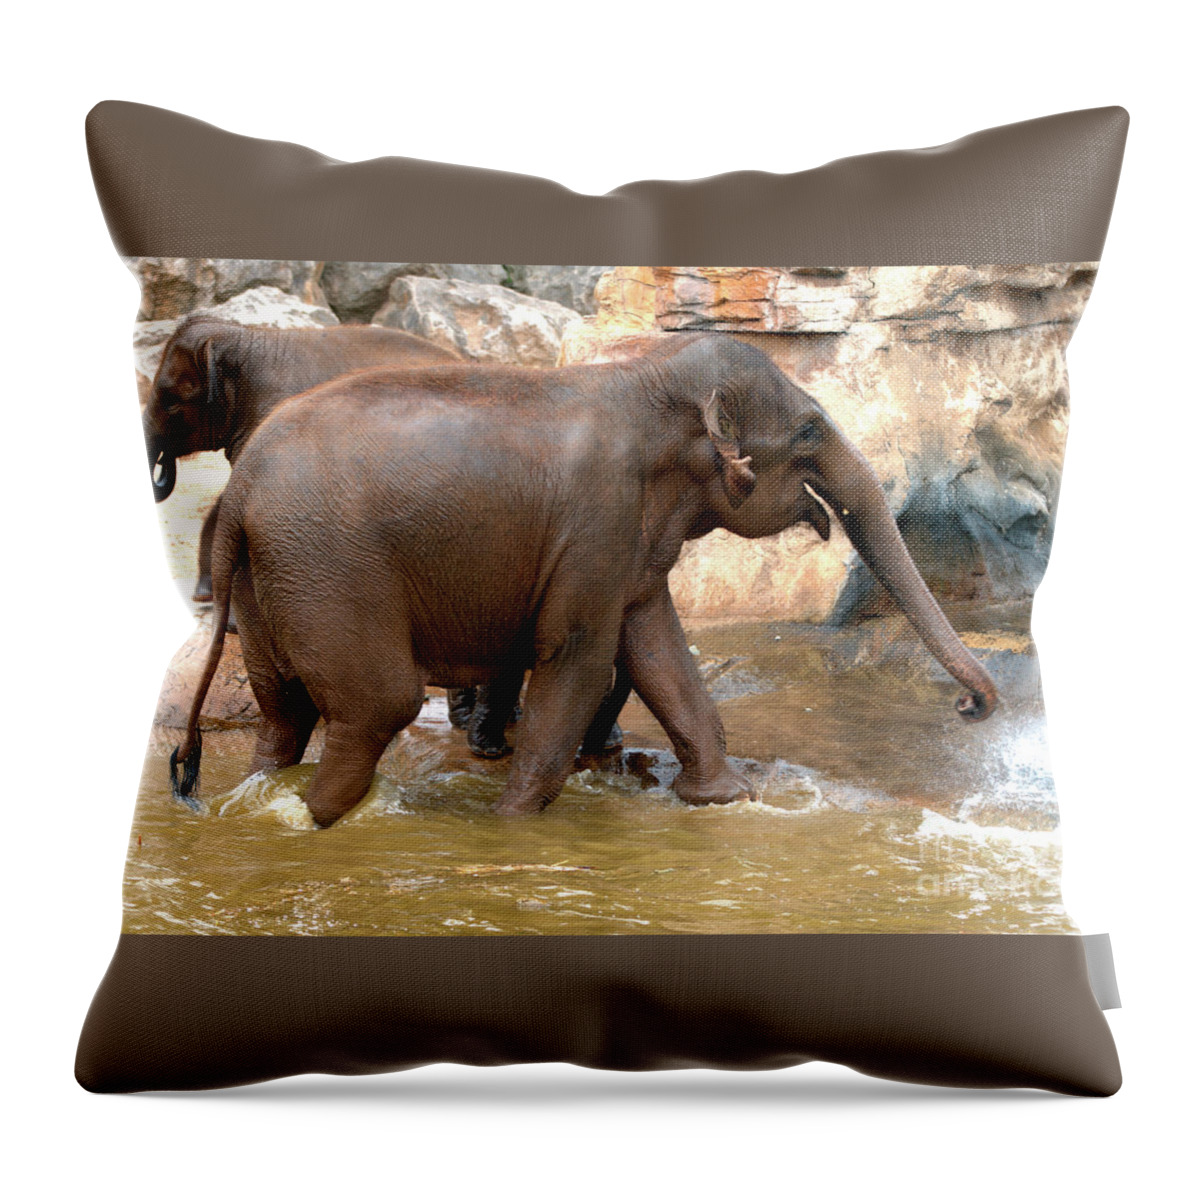 Elephants Throw Pillow featuring the photograph Bath Time by Baggieoldboy